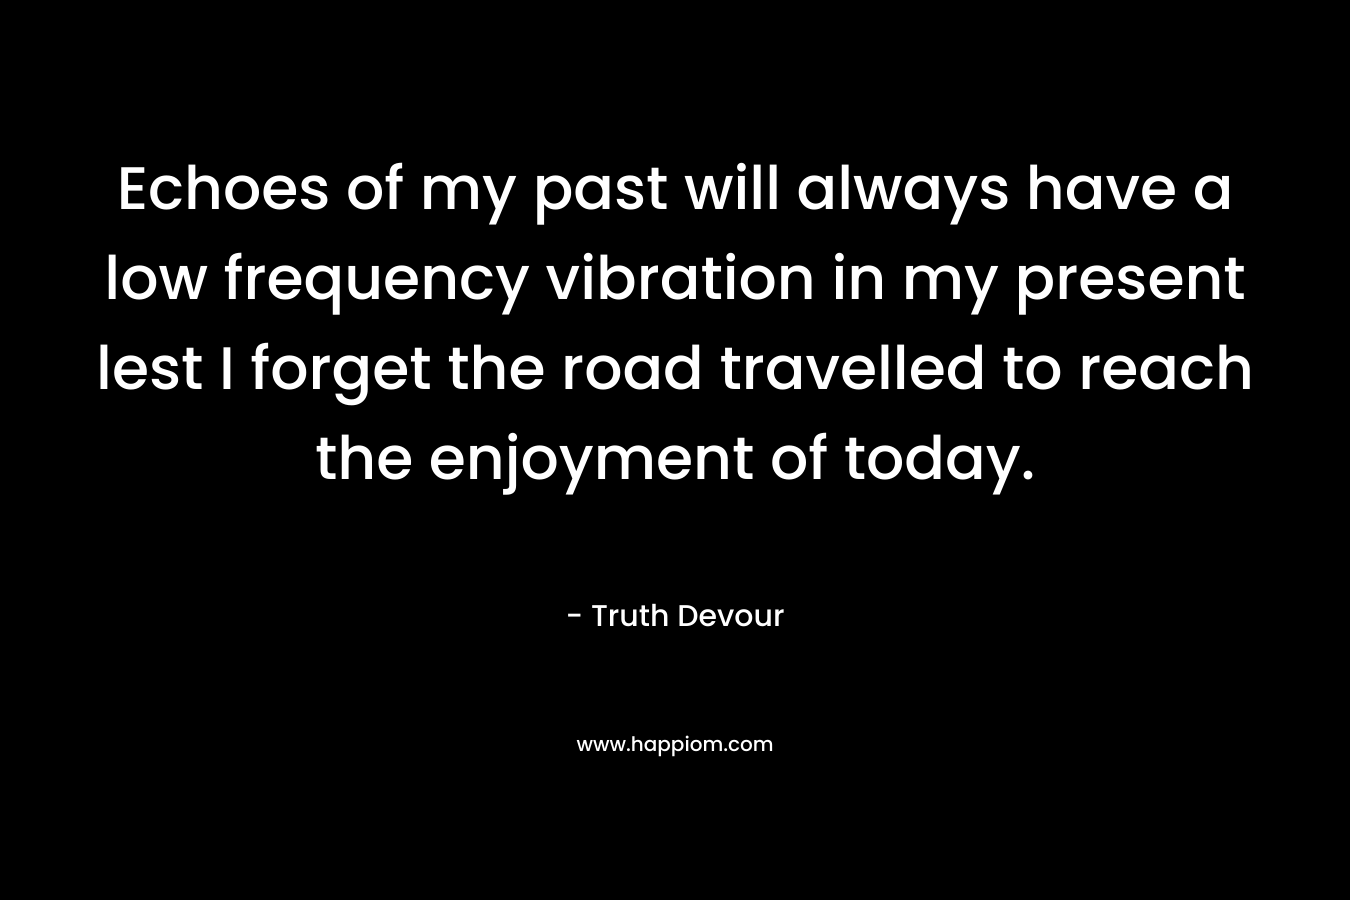 Echoes of my past will always have a low frequency vibration in my present lest I forget the road travelled to reach the enjoyment of today. – Truth Devour